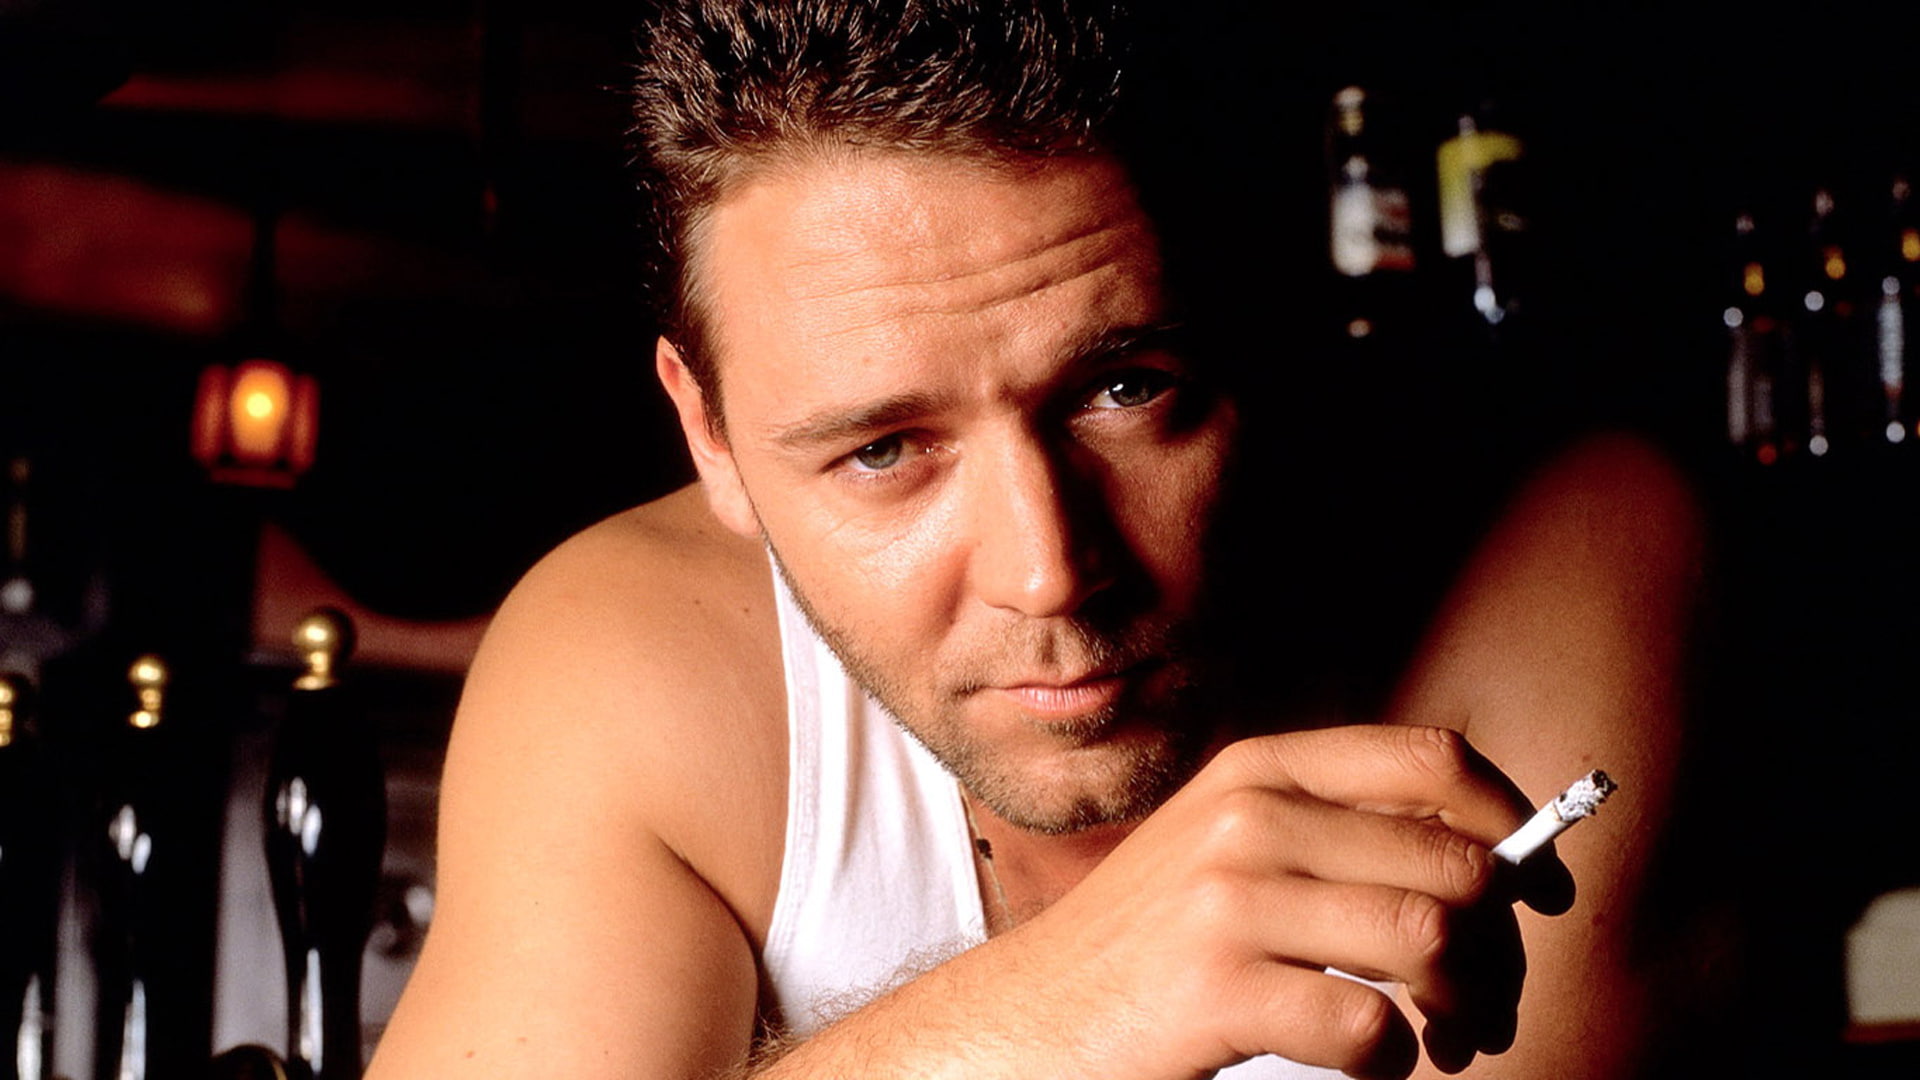 men's white tank top, actor, Russell Crowe, background., one person